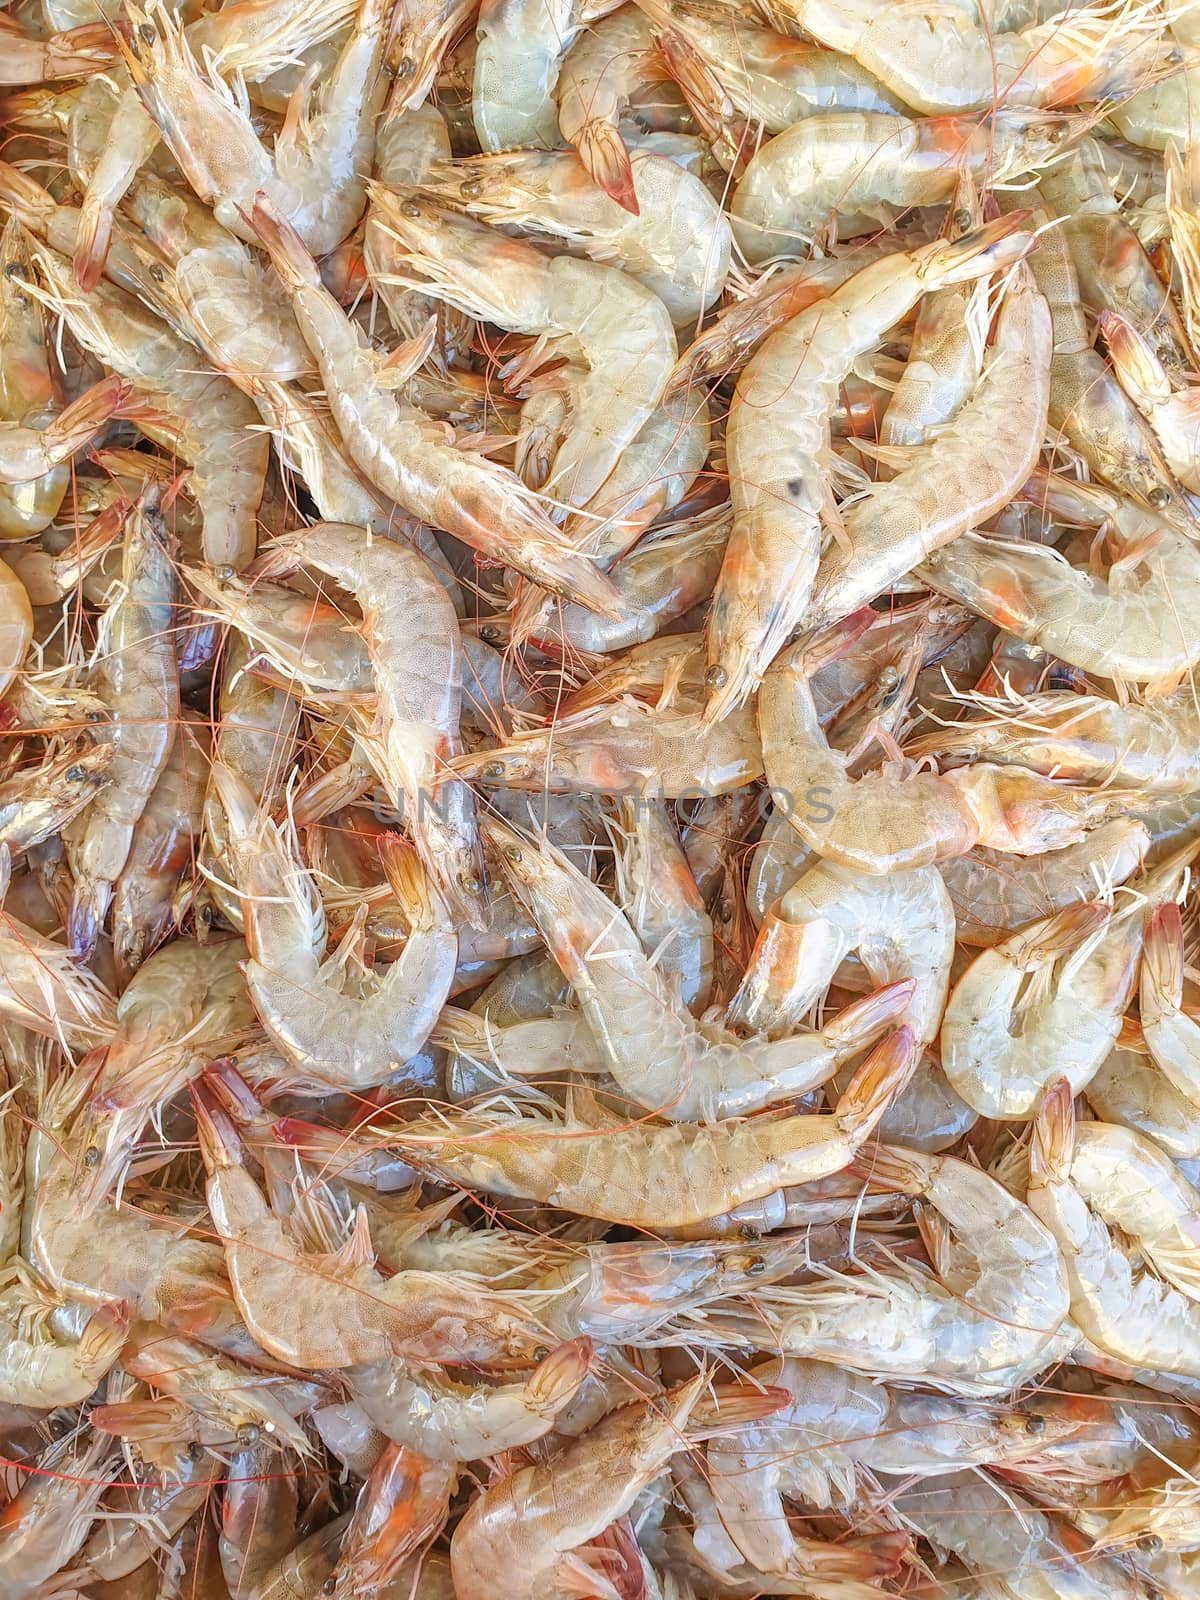 Defrost prawn on ice for sale, Fish local market stall with fresh and defrost seafood